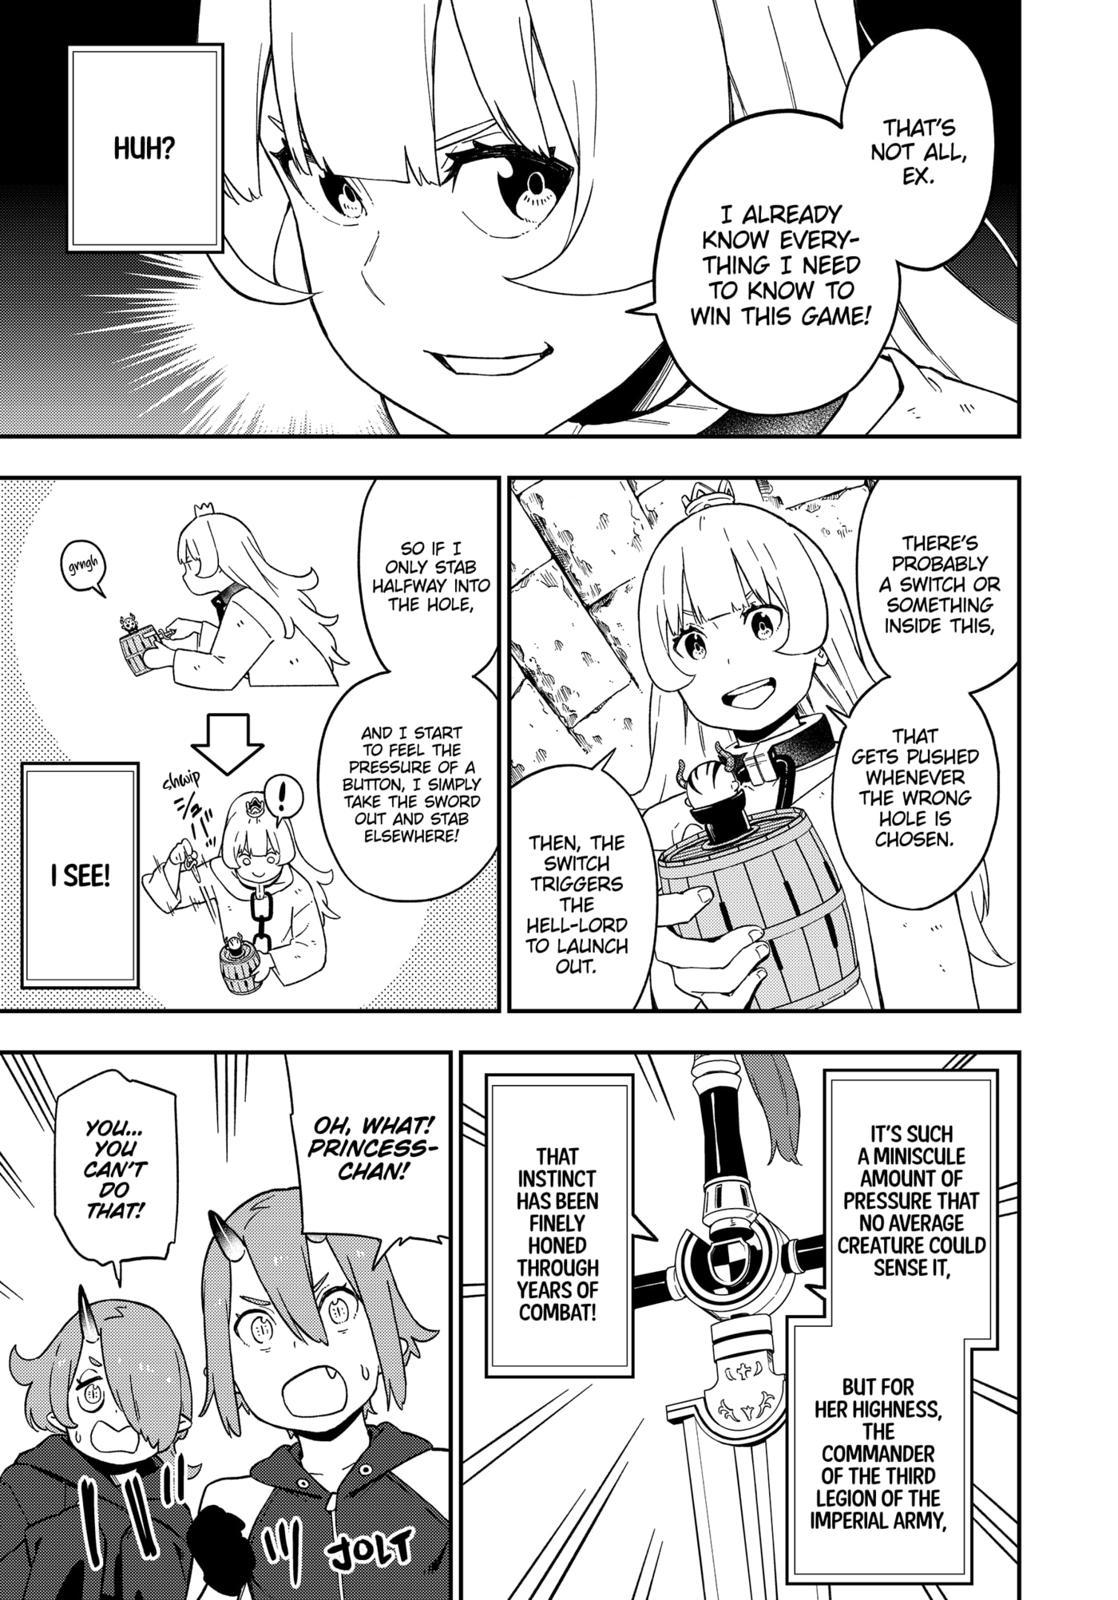 It's Time for "Interrogation", Princess! - chapter 61 - #5